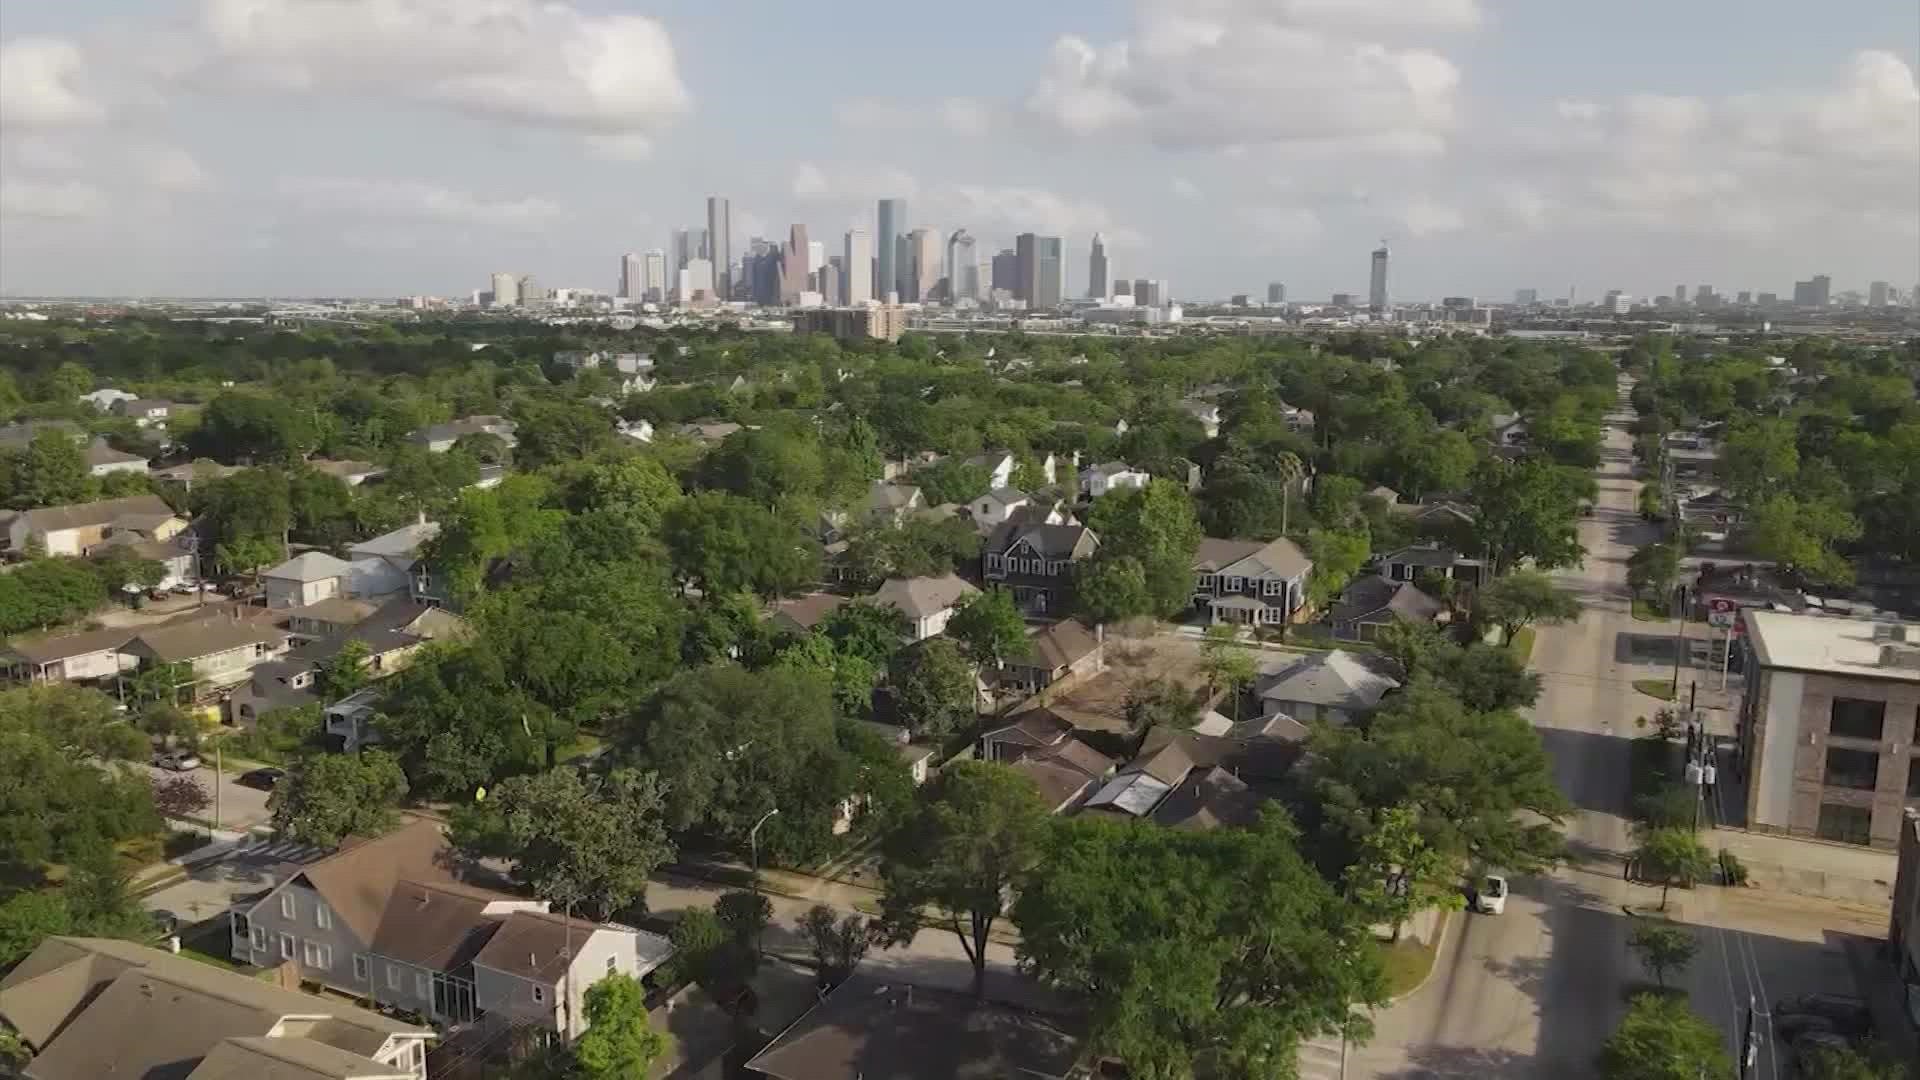 The median home price in the Houston area increased by $50,000 in one year.